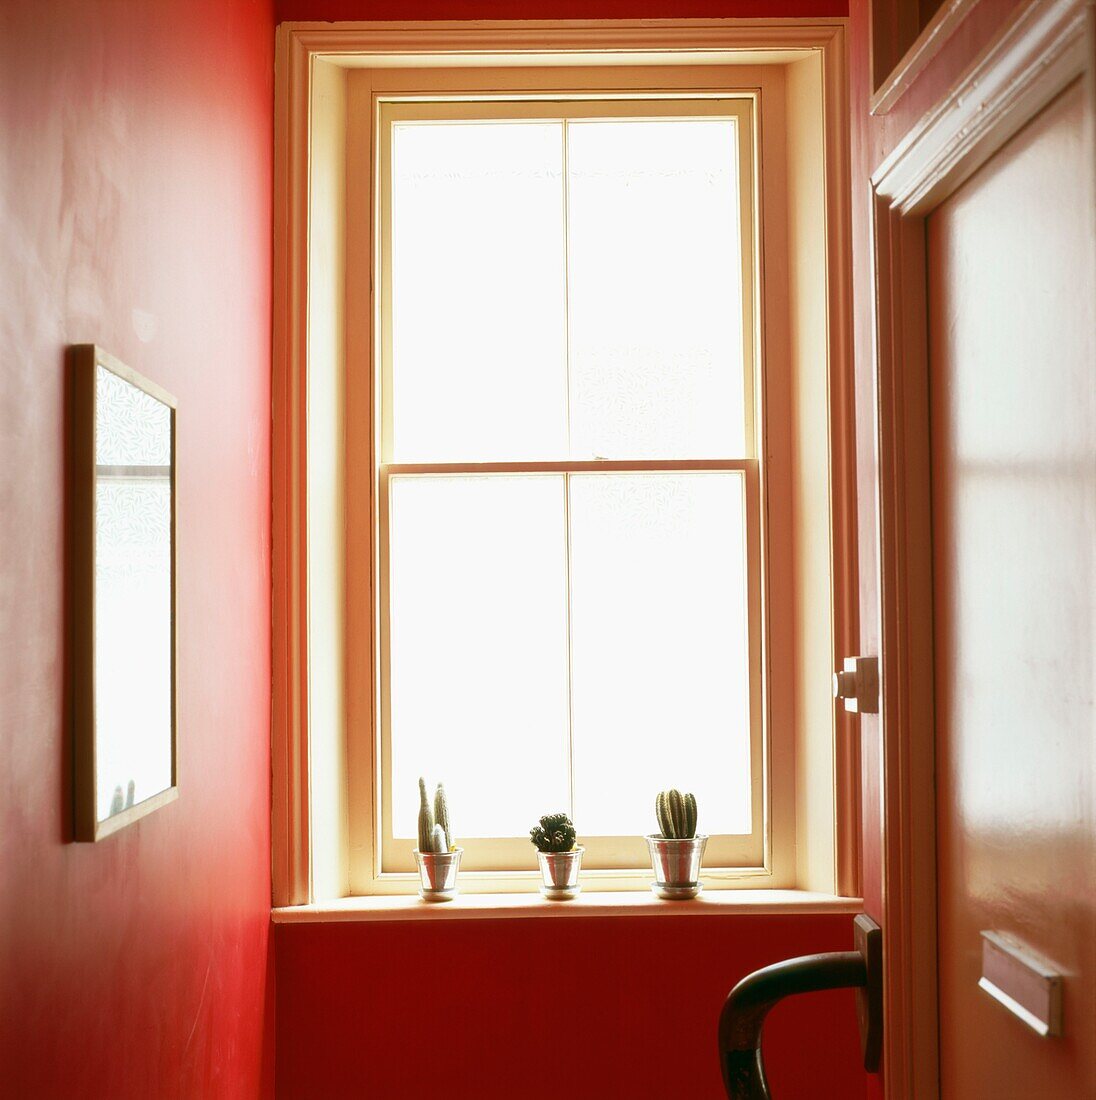 Town house communal entrance hall painted in red with large sash window